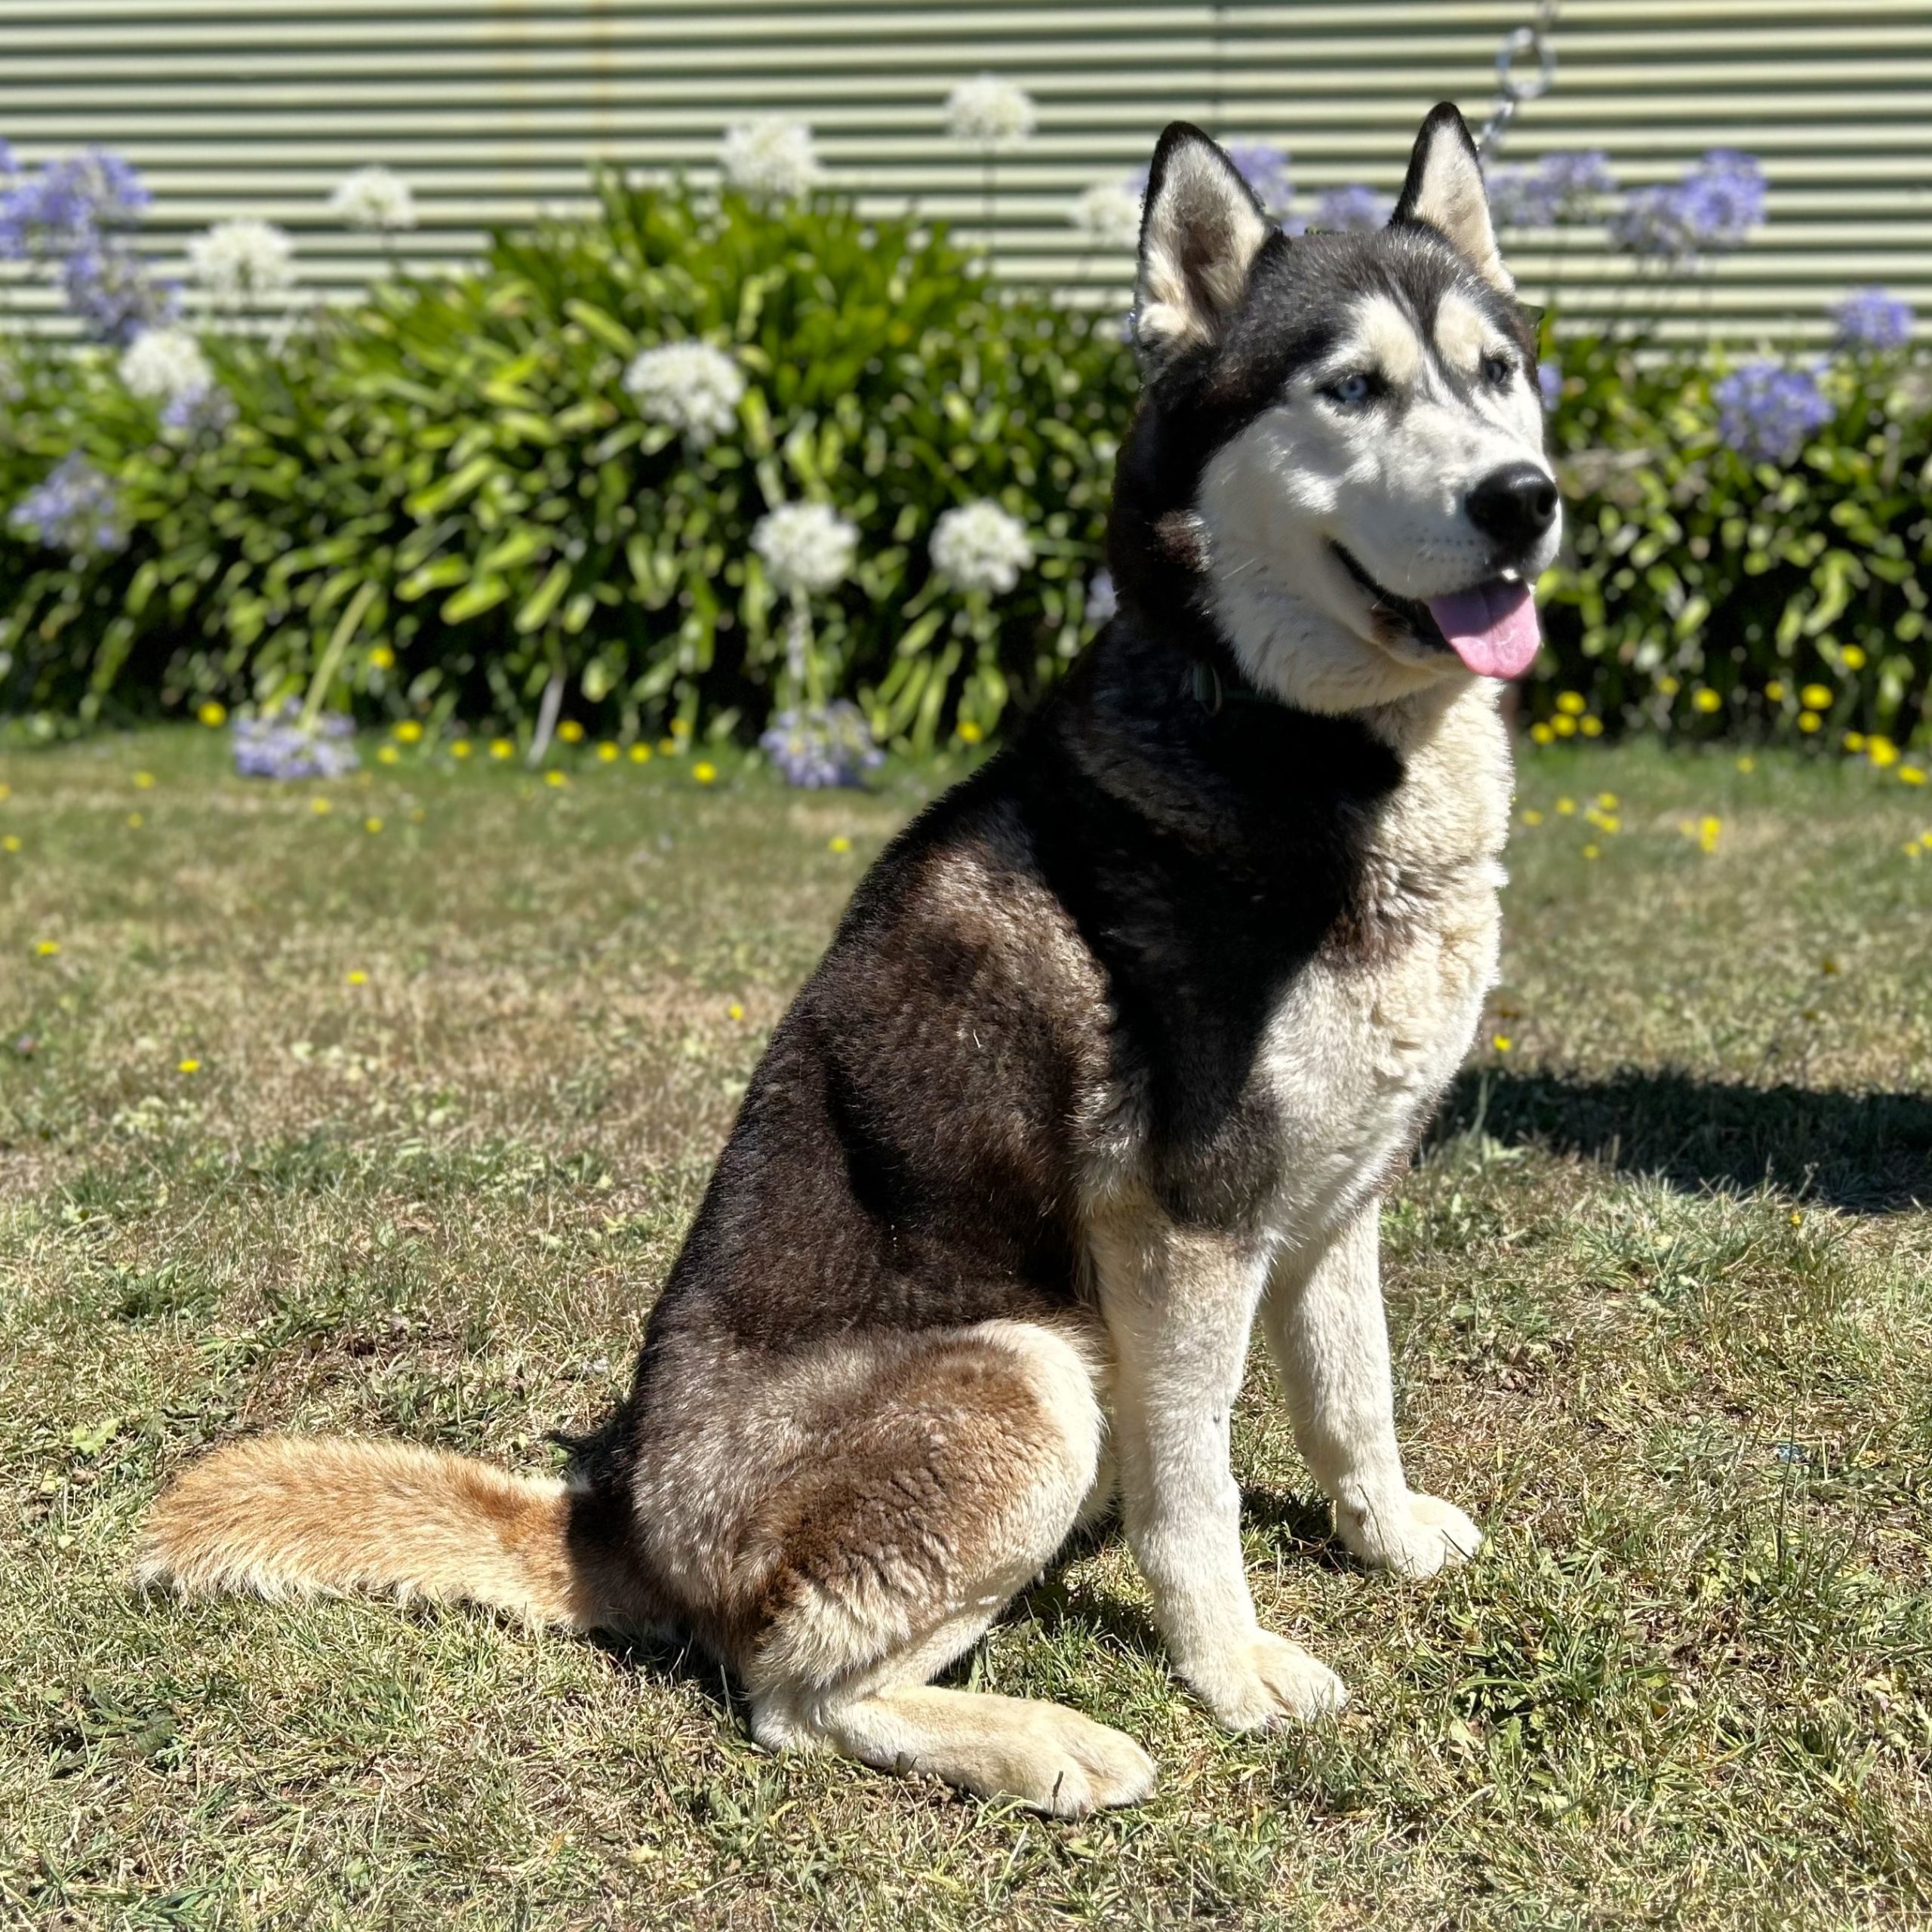 Rocky the black and white Husky sitting on the grass.